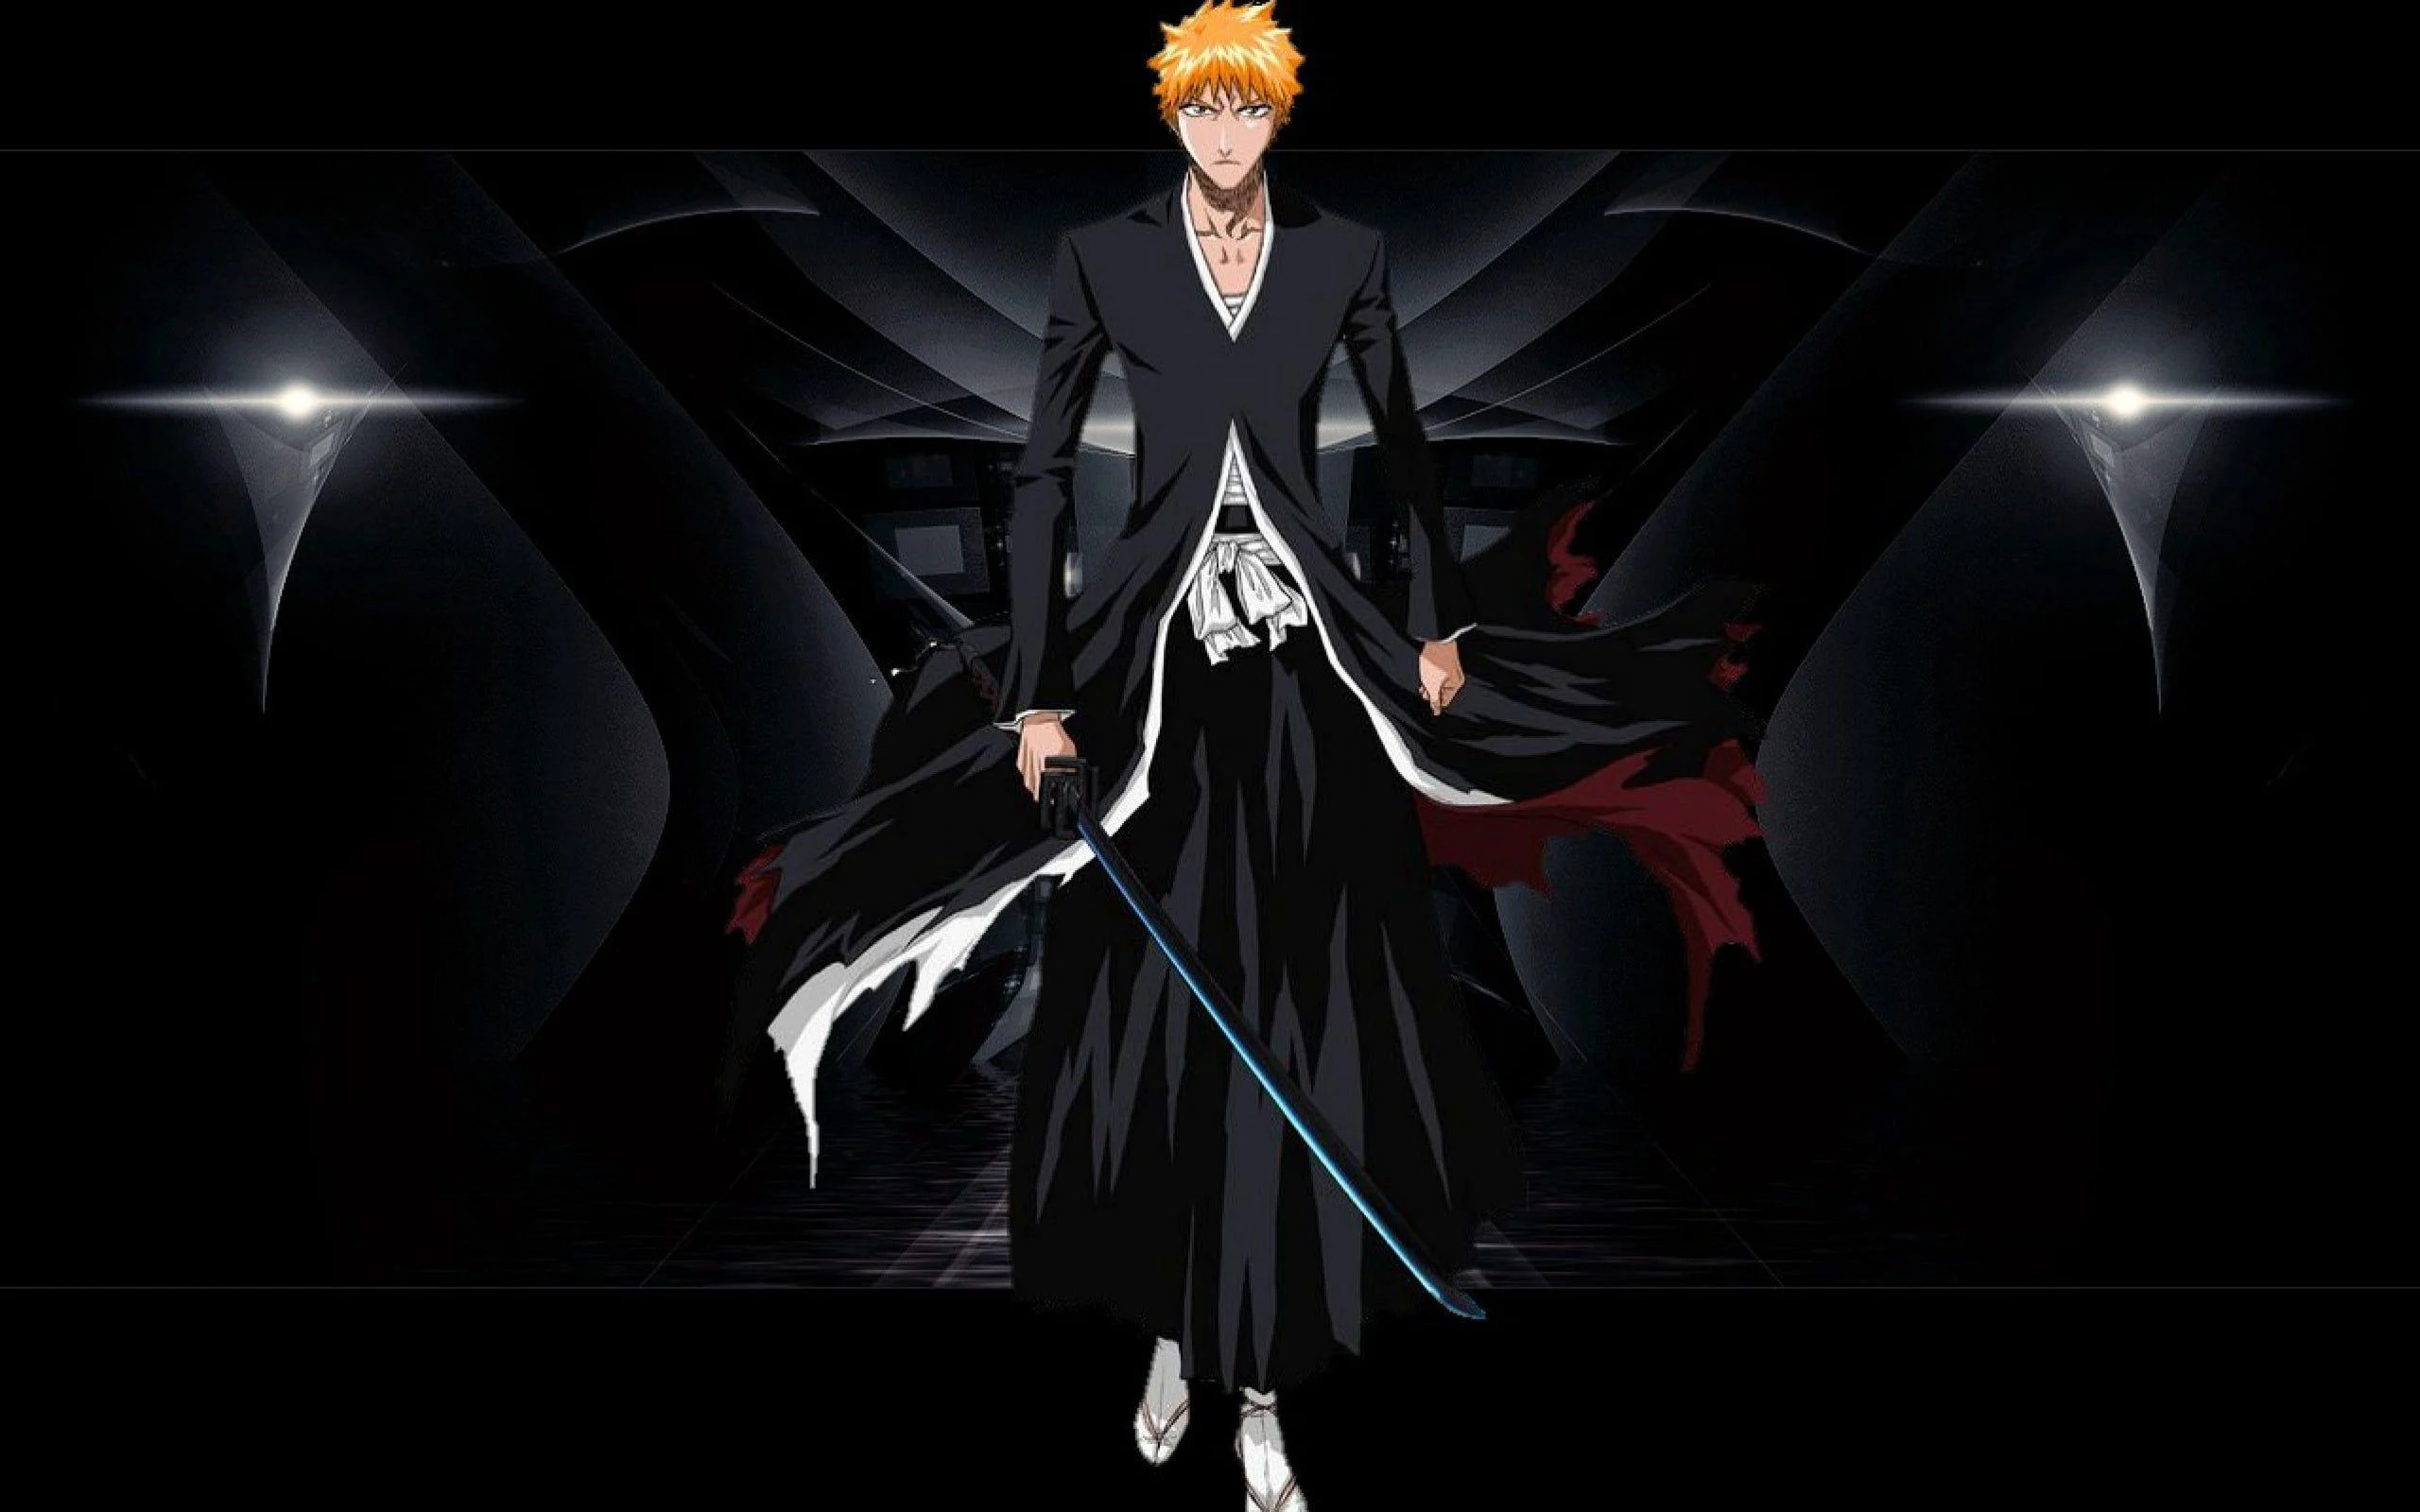 Why No One Can Steal Ichigo's Bankai in Bleach's Latest Arc: The Secret Power Mix You Need to Know